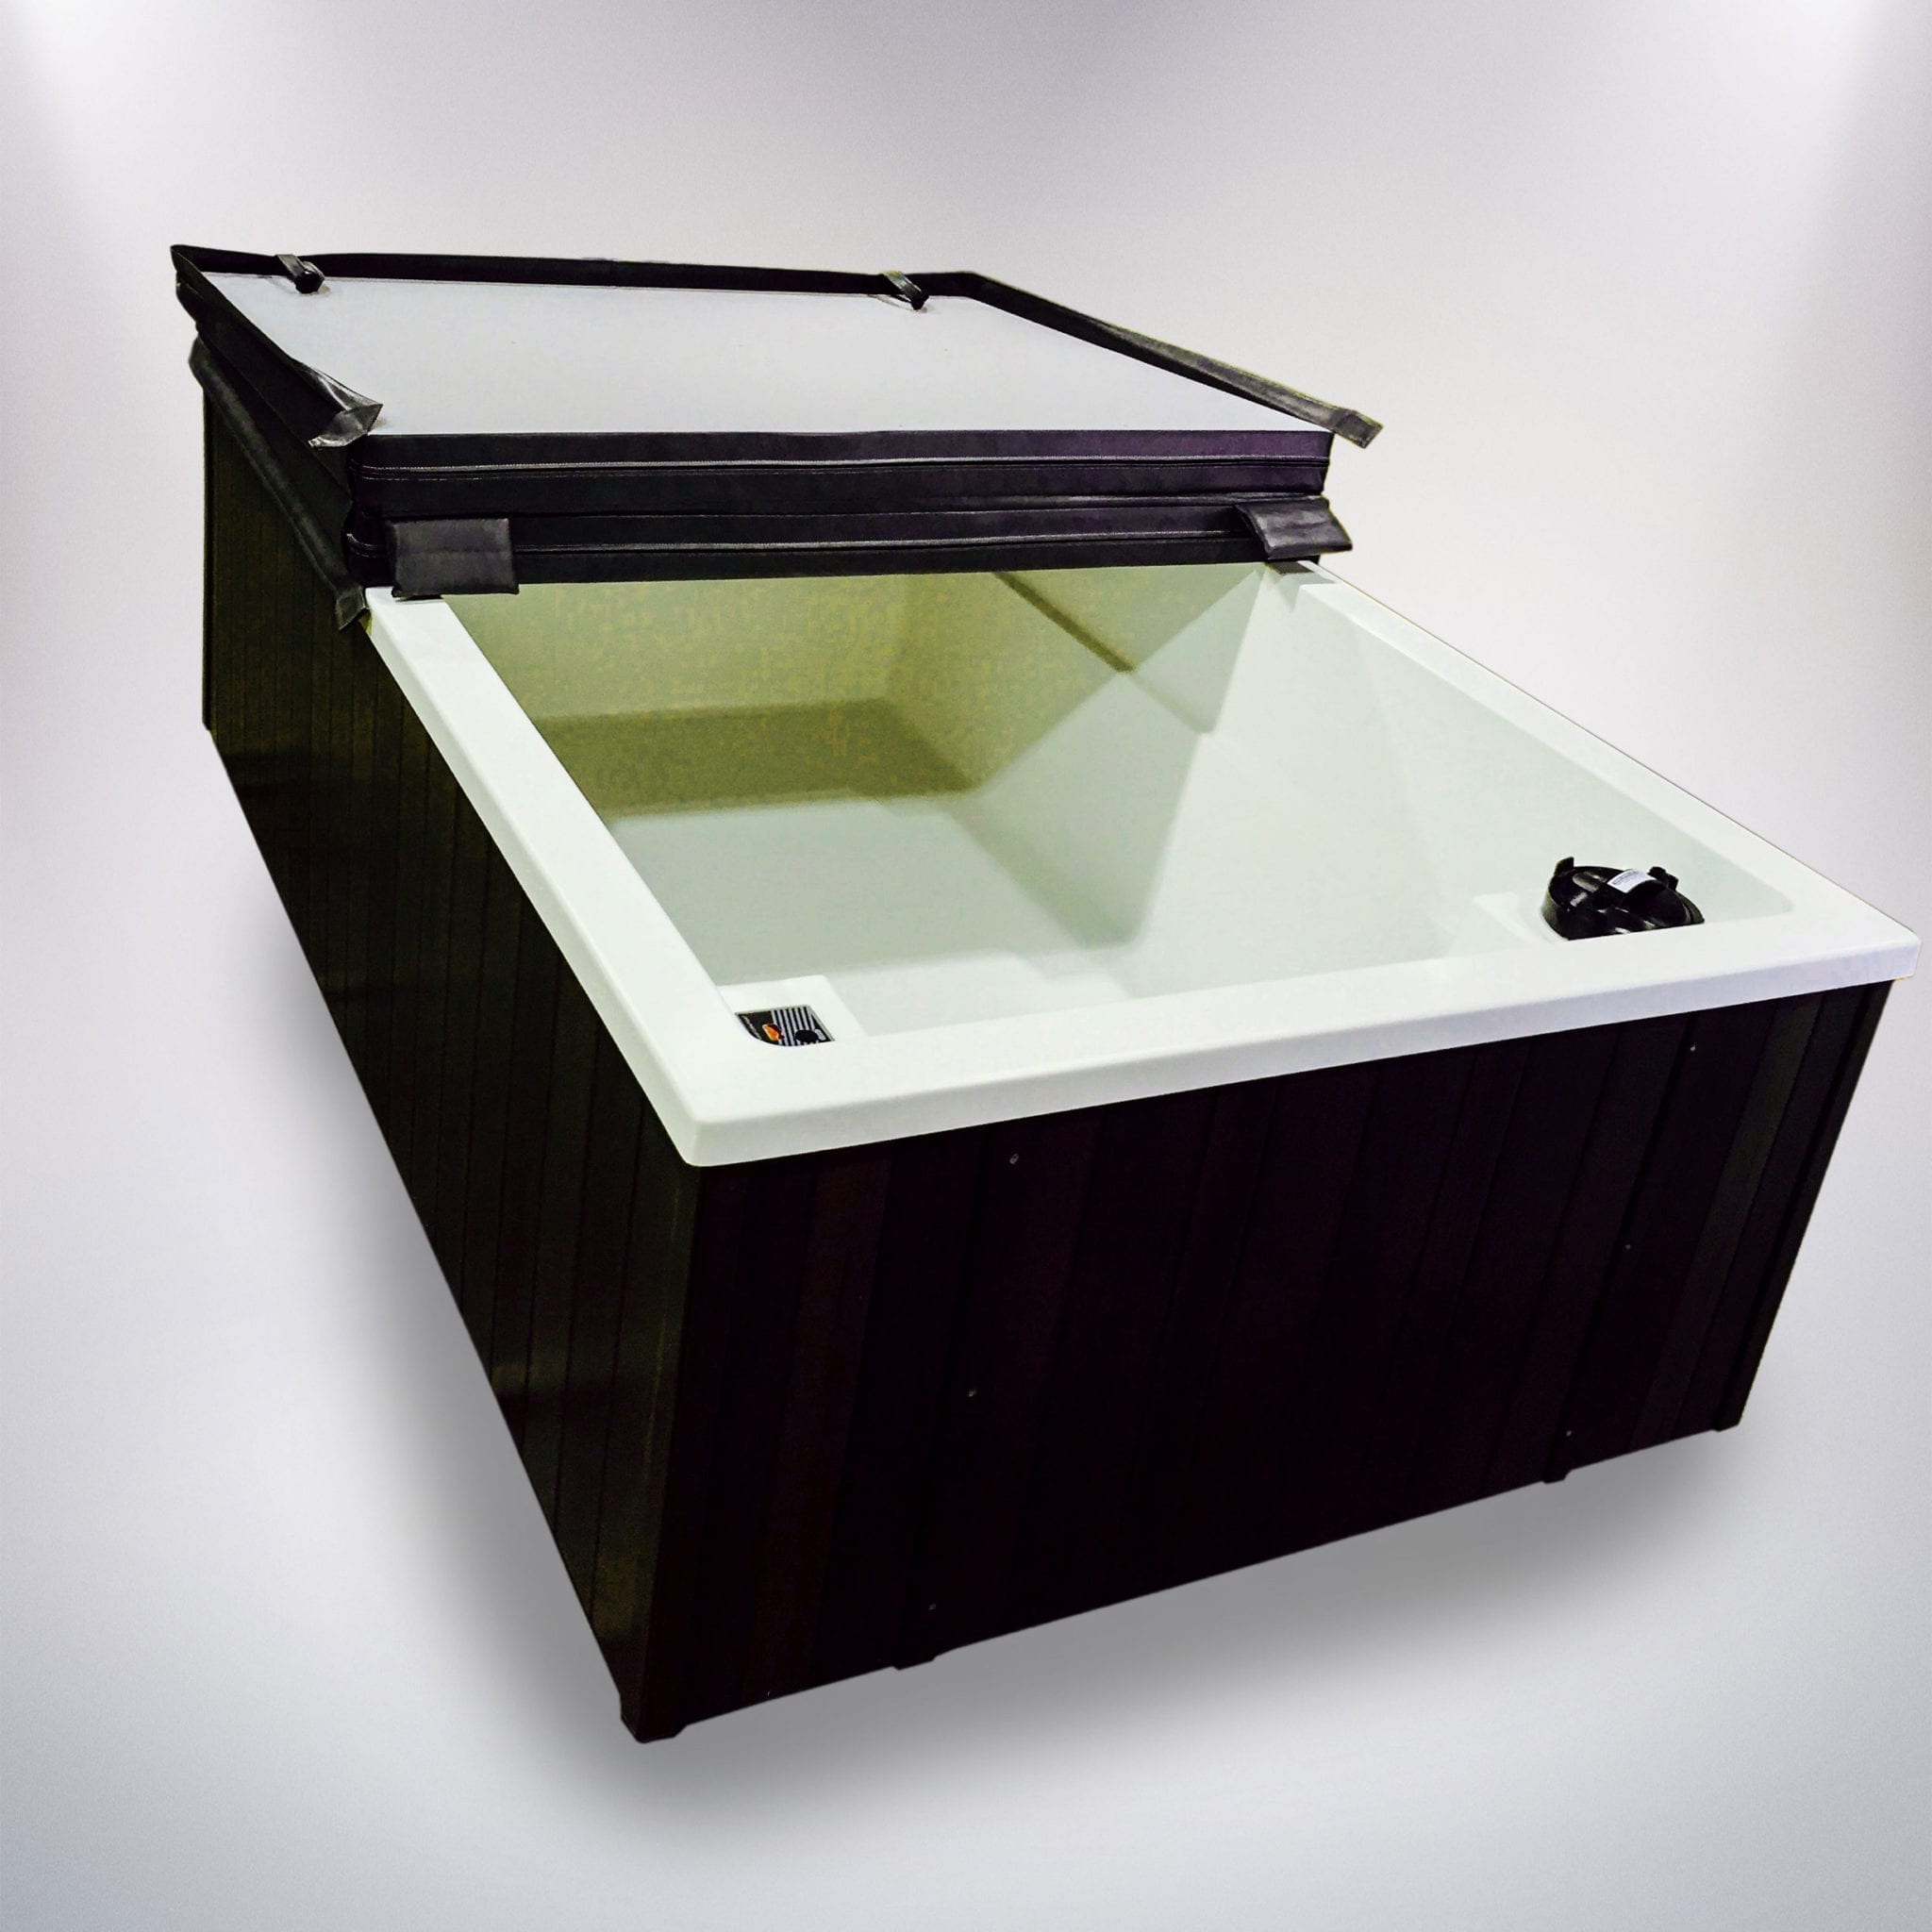 Best Float Tank For Home - Under $10K | Personal Floatation Tank